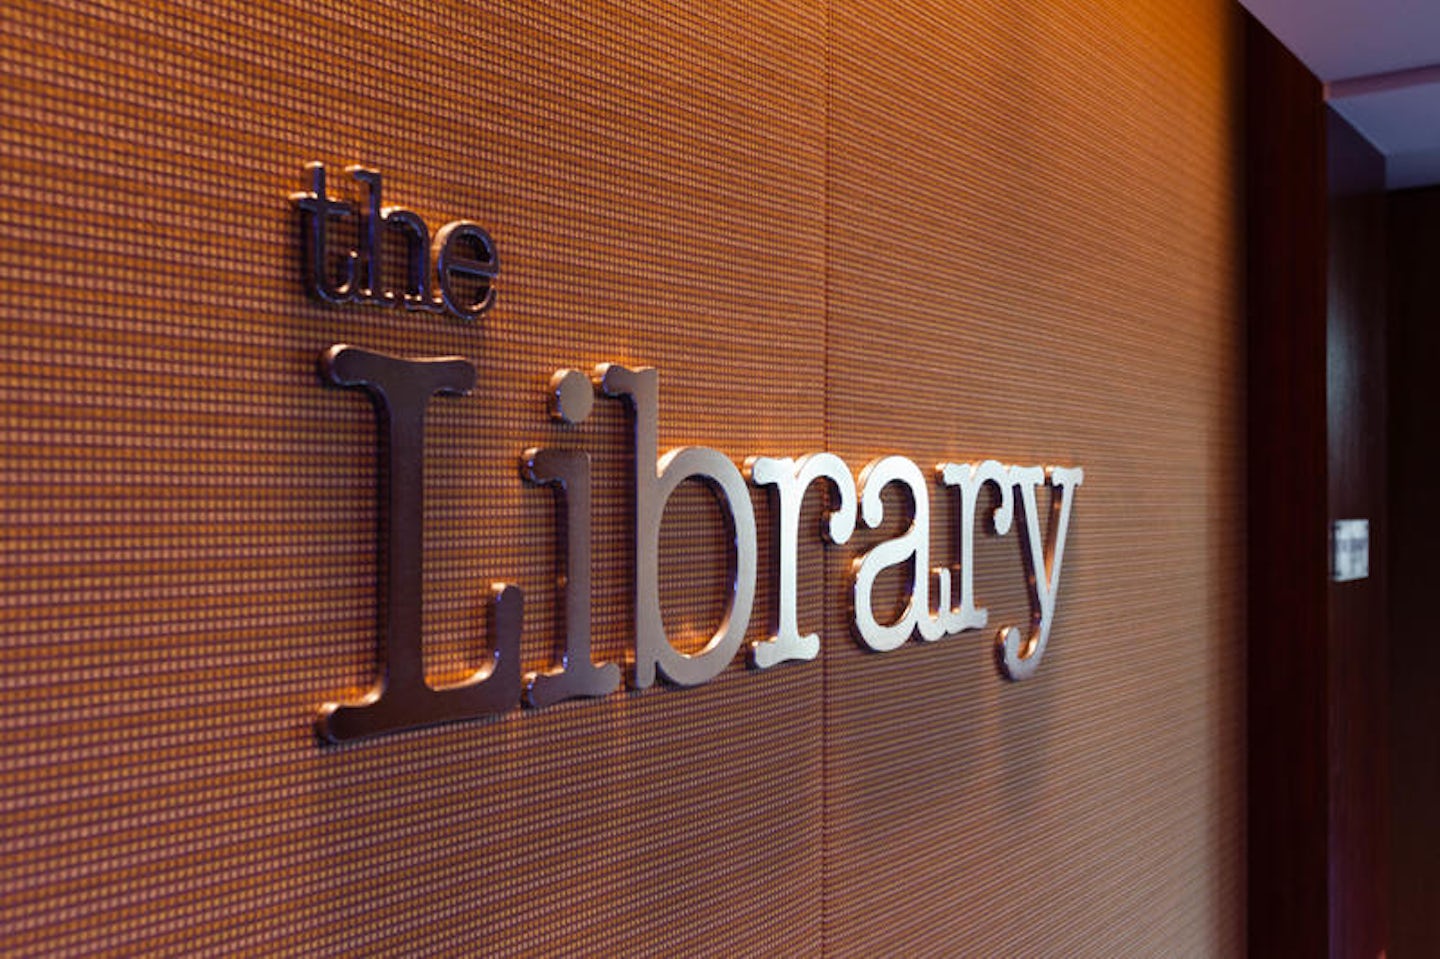 The Library on Celebrity Silhouette